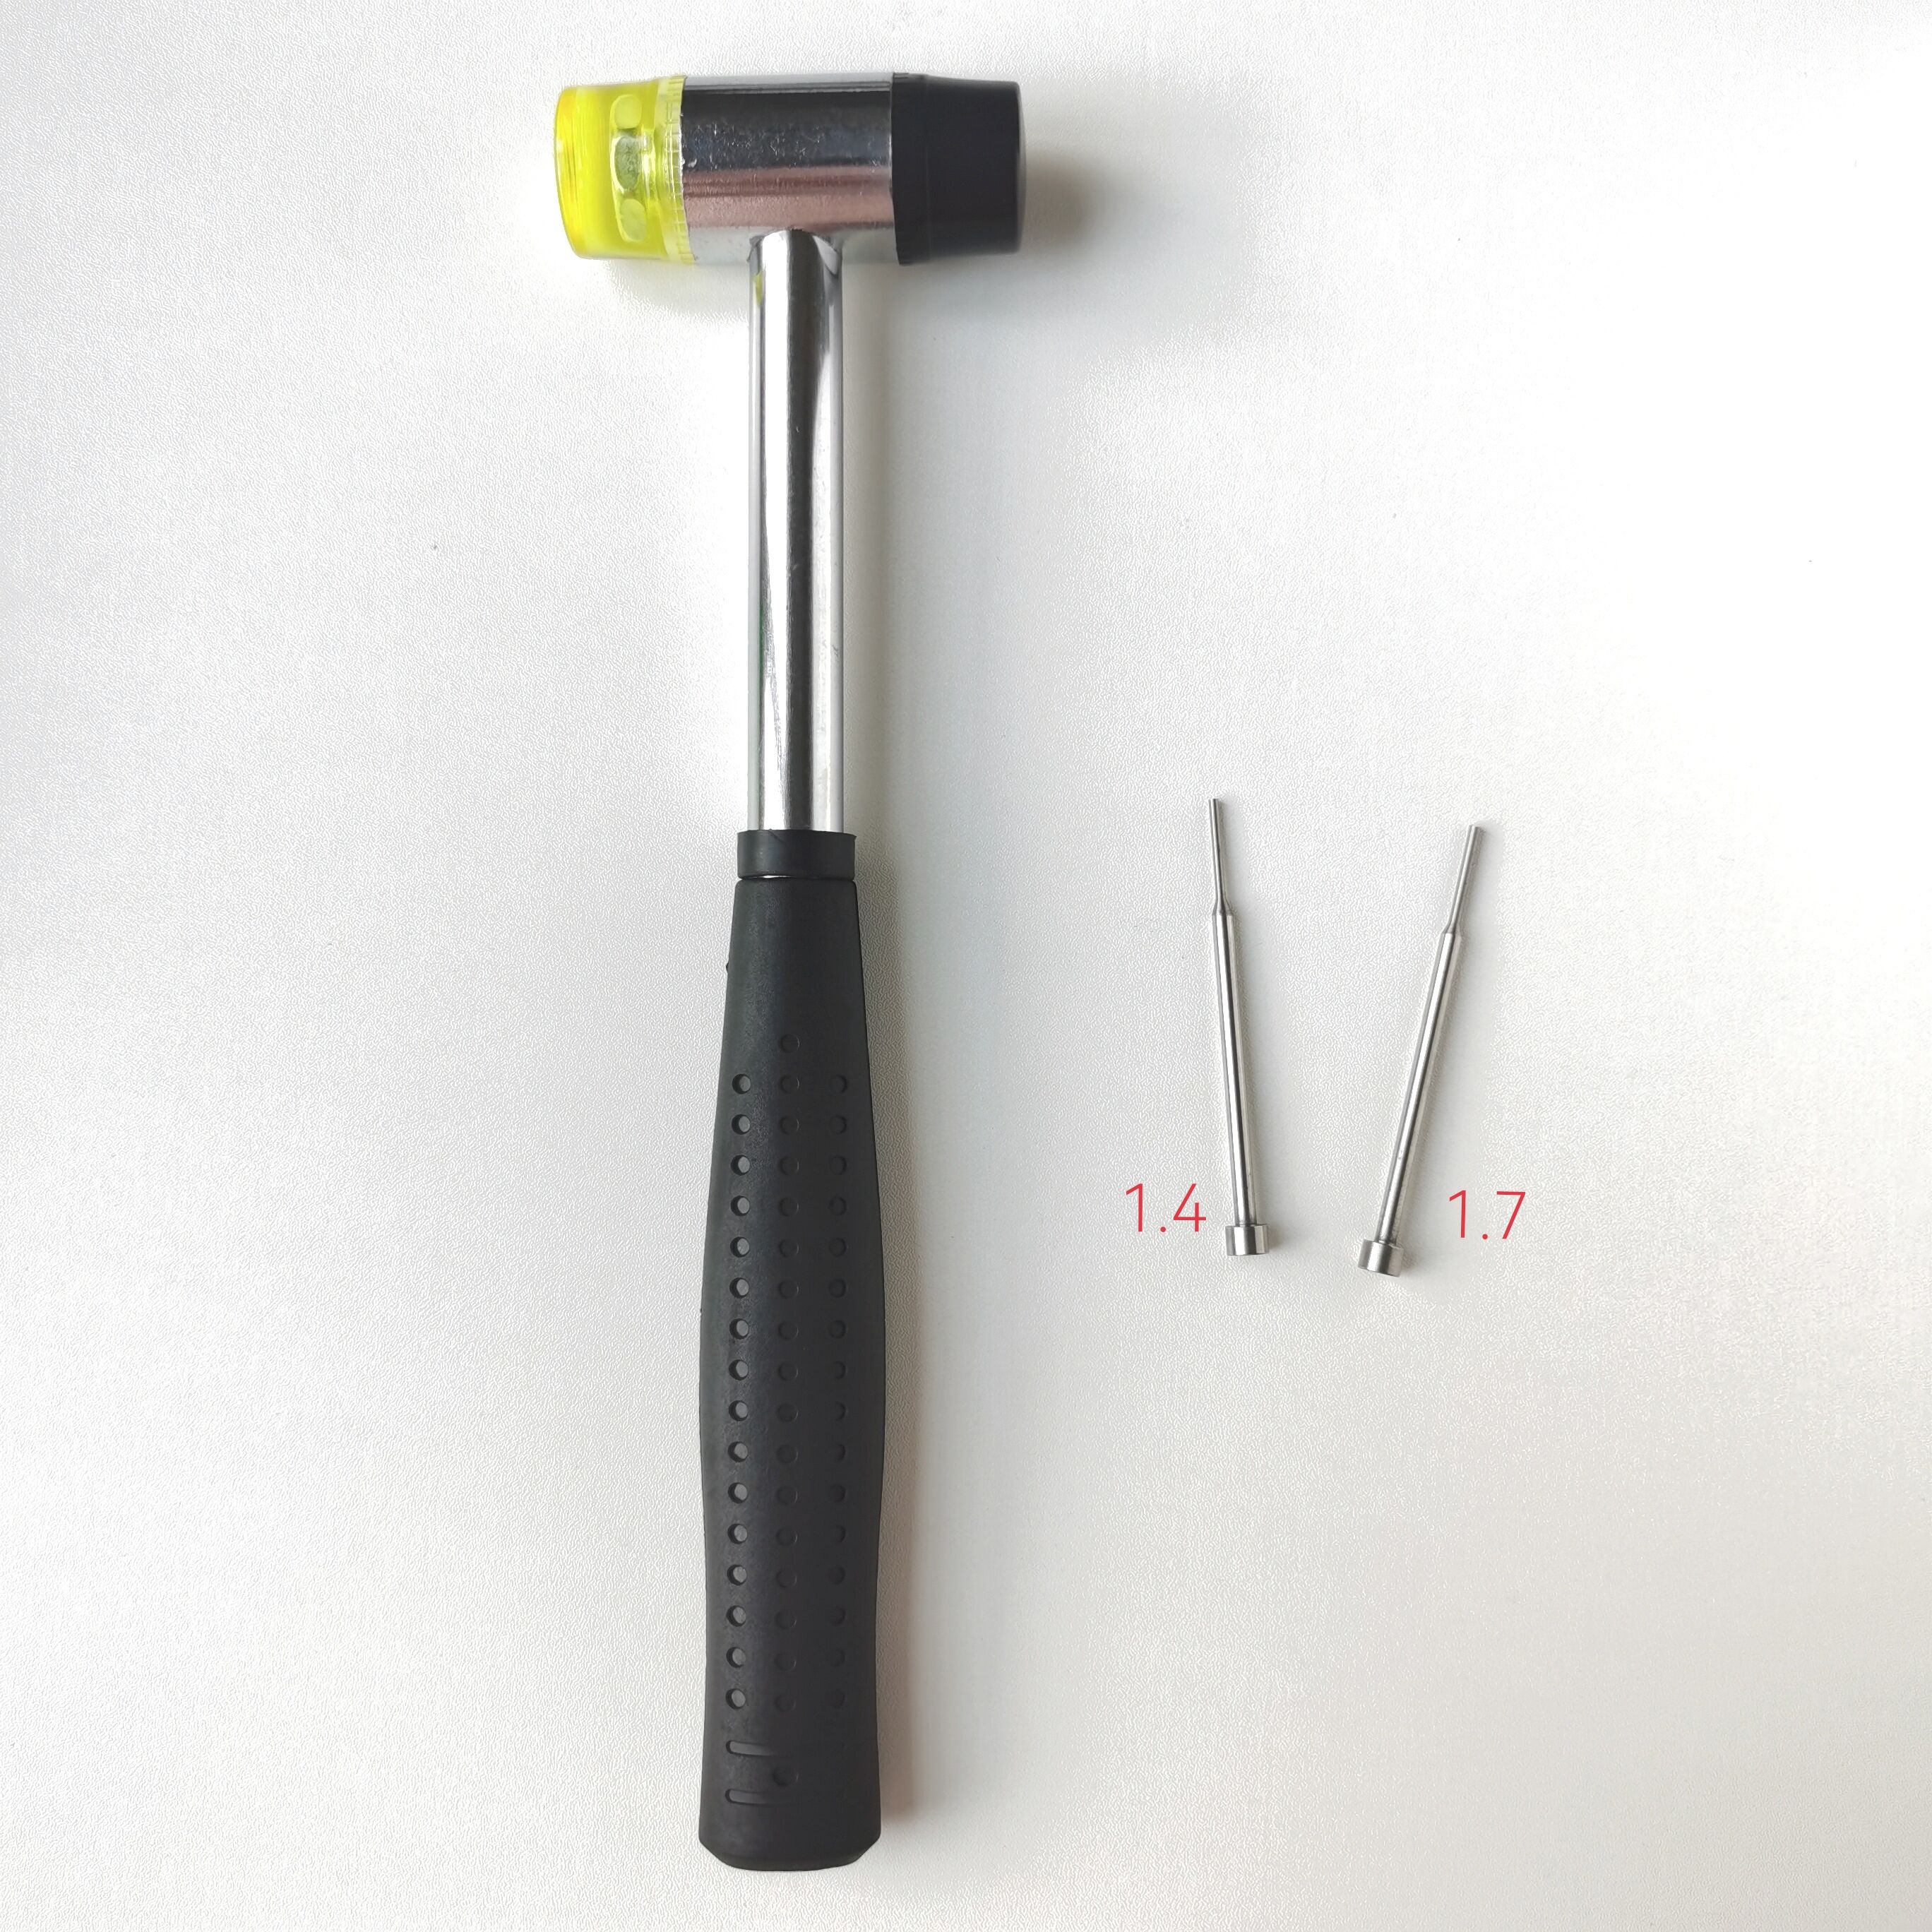  Remove the pin Special tool for car folding key remote One tool with 2 type pins 1.4mm &1.7mm each one